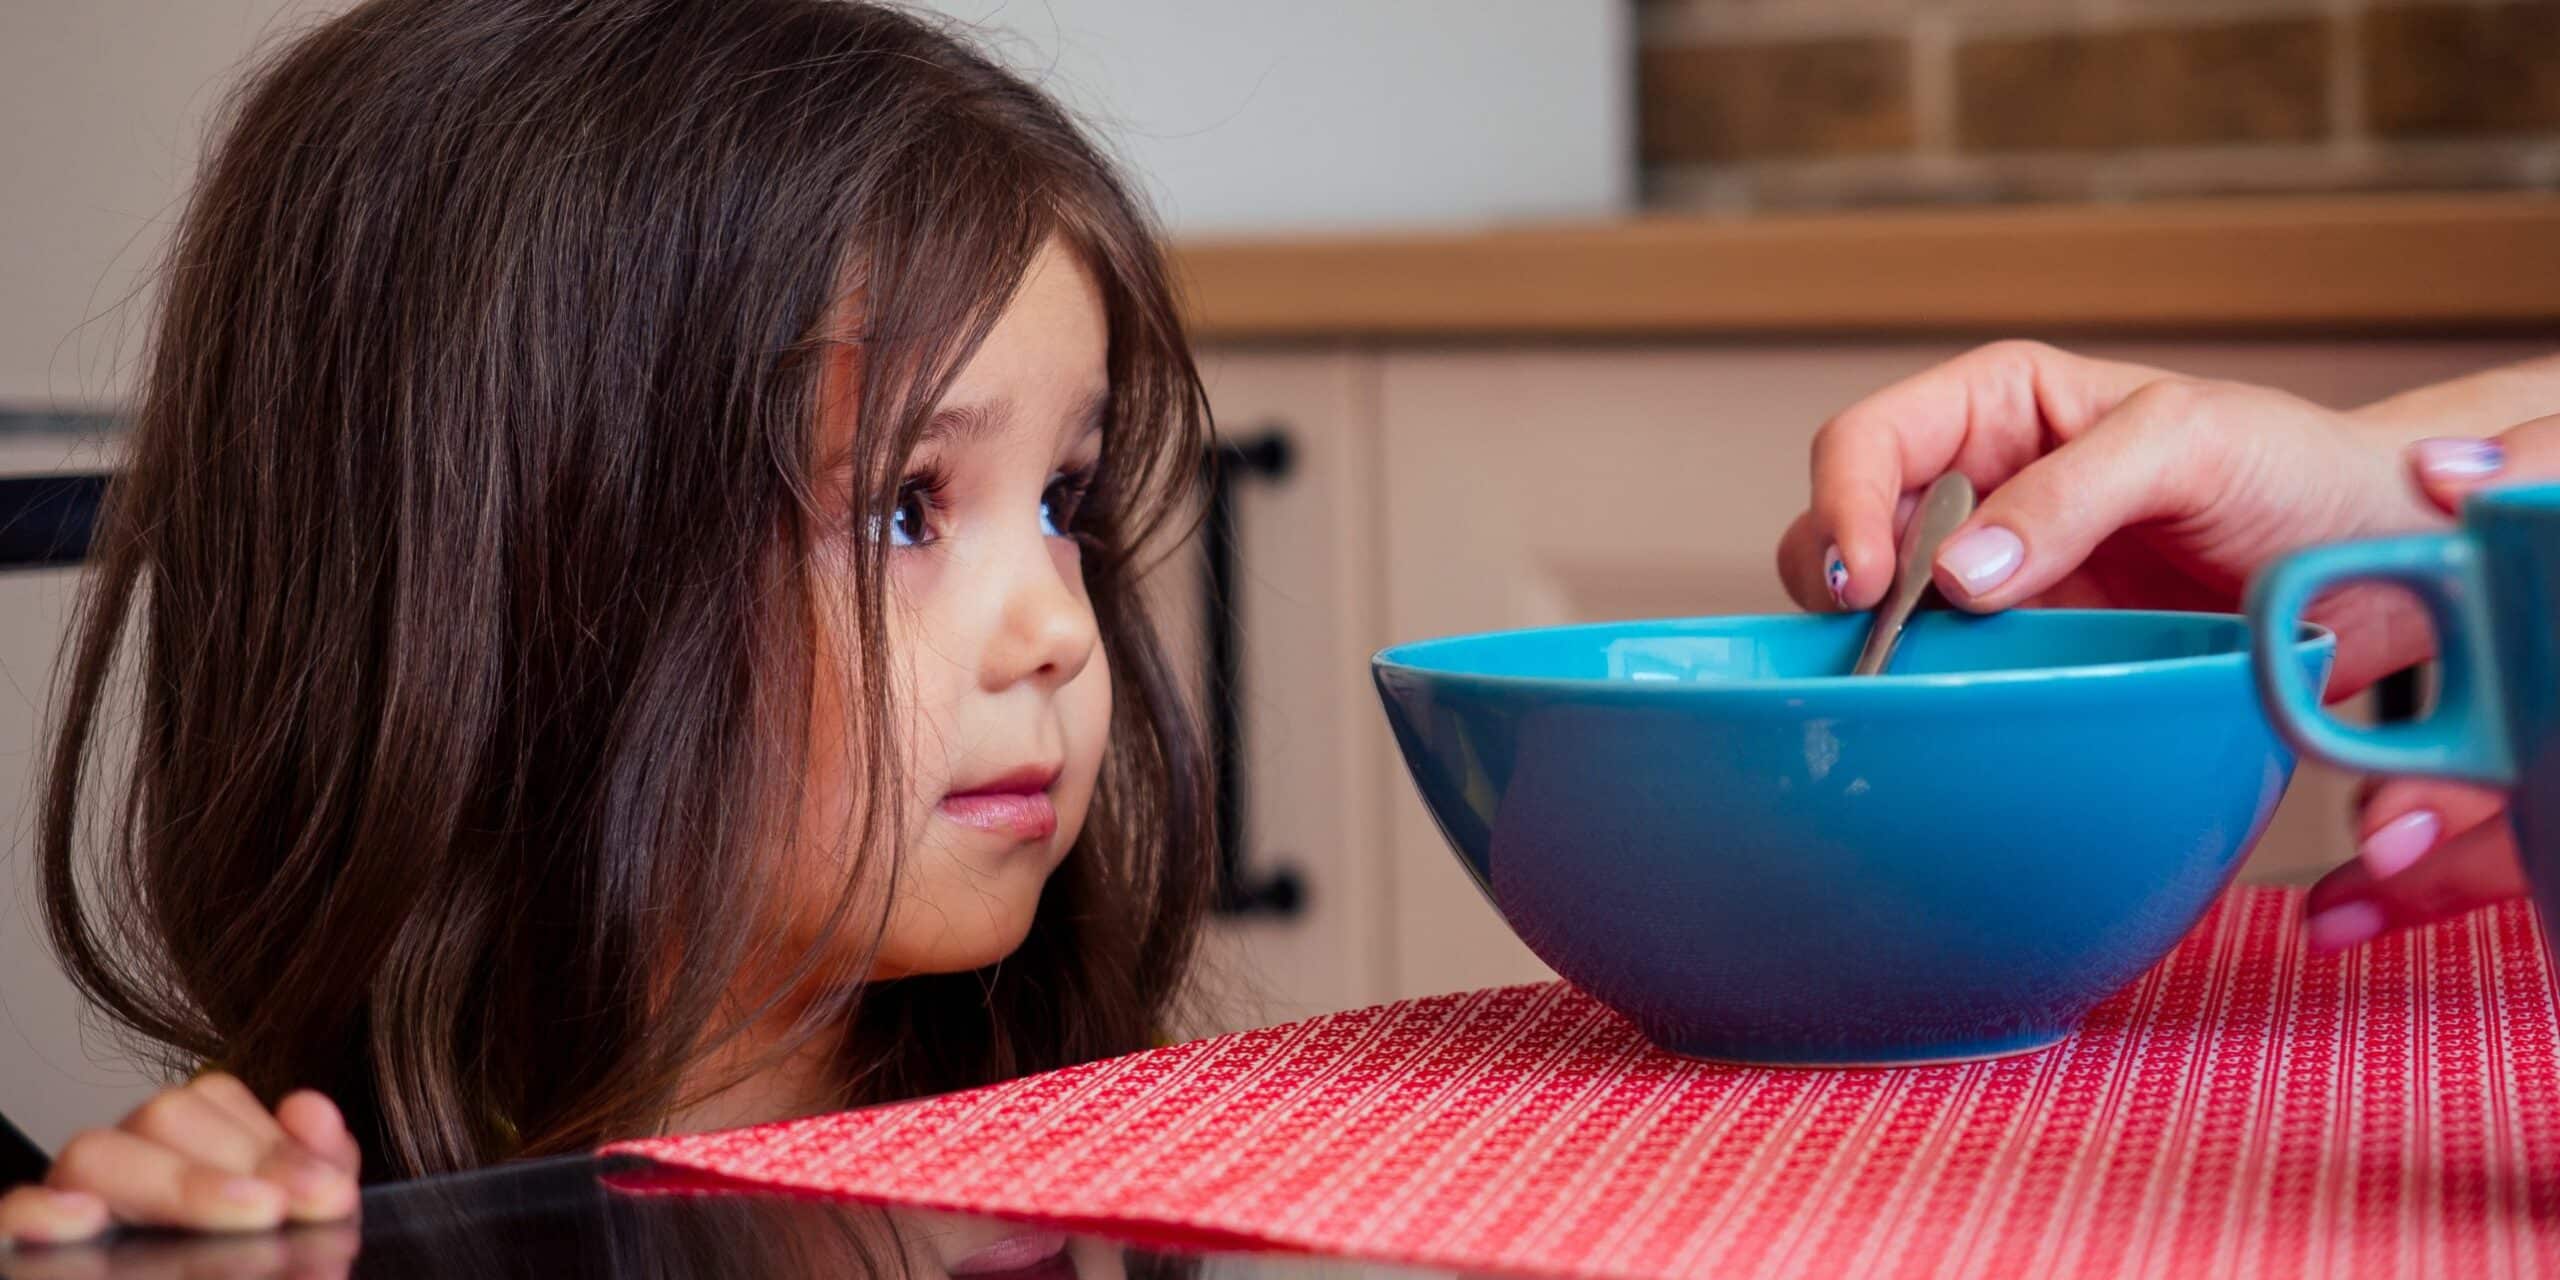 toddler won't eat bowl of food in front of her